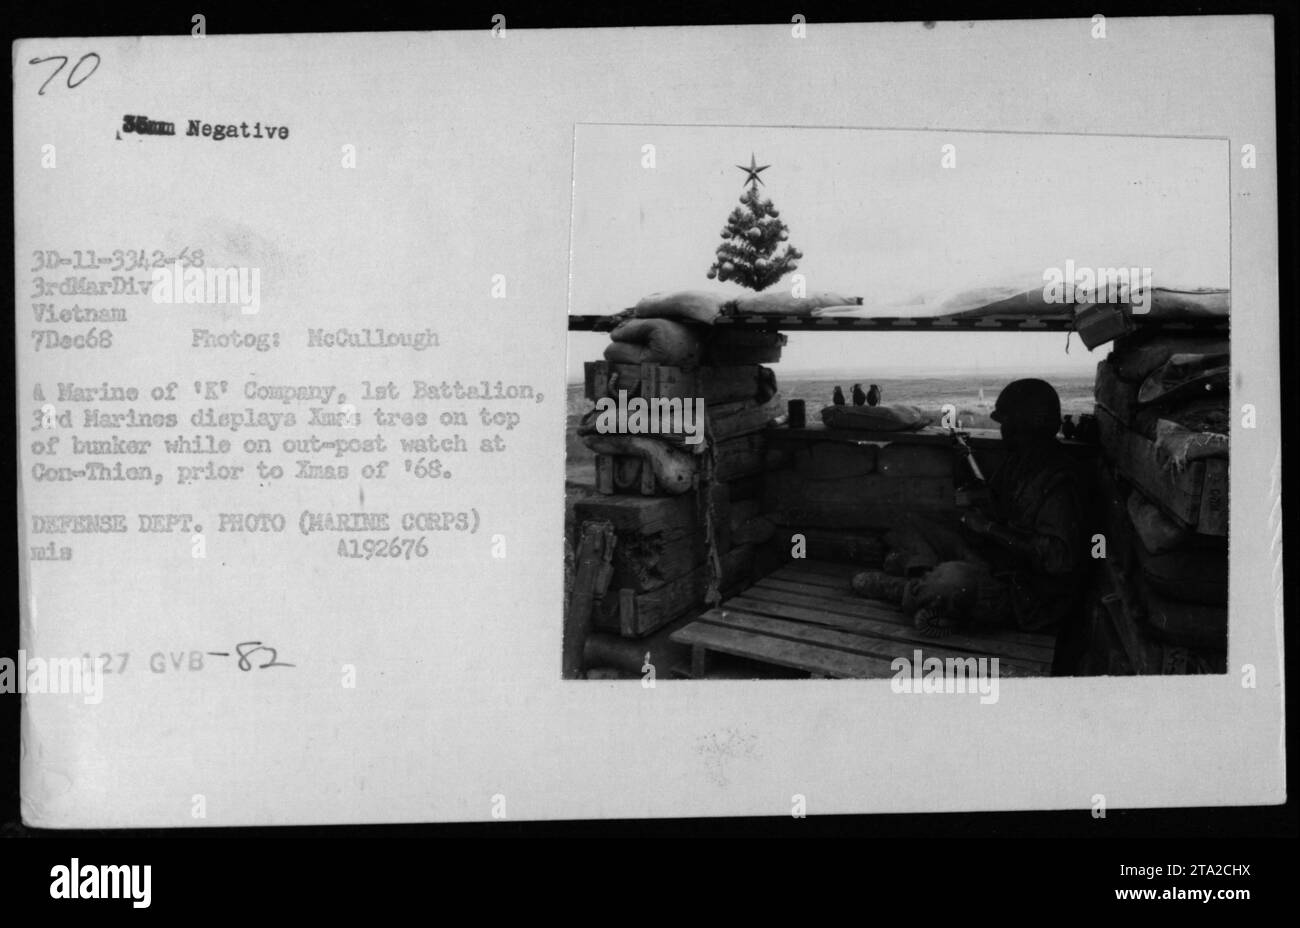 Marine of K Company, 1st Battalion, 3rd Marines in Vietnam, on December 7, 1968, displays a Christmas tree on top of a bunker while on outpost watch at Con-Thien. The display was in preparation for Christmas celebrations during the holiday season of '68. (Source: Defense Department photo by McCullough & Marine) Stock Photo